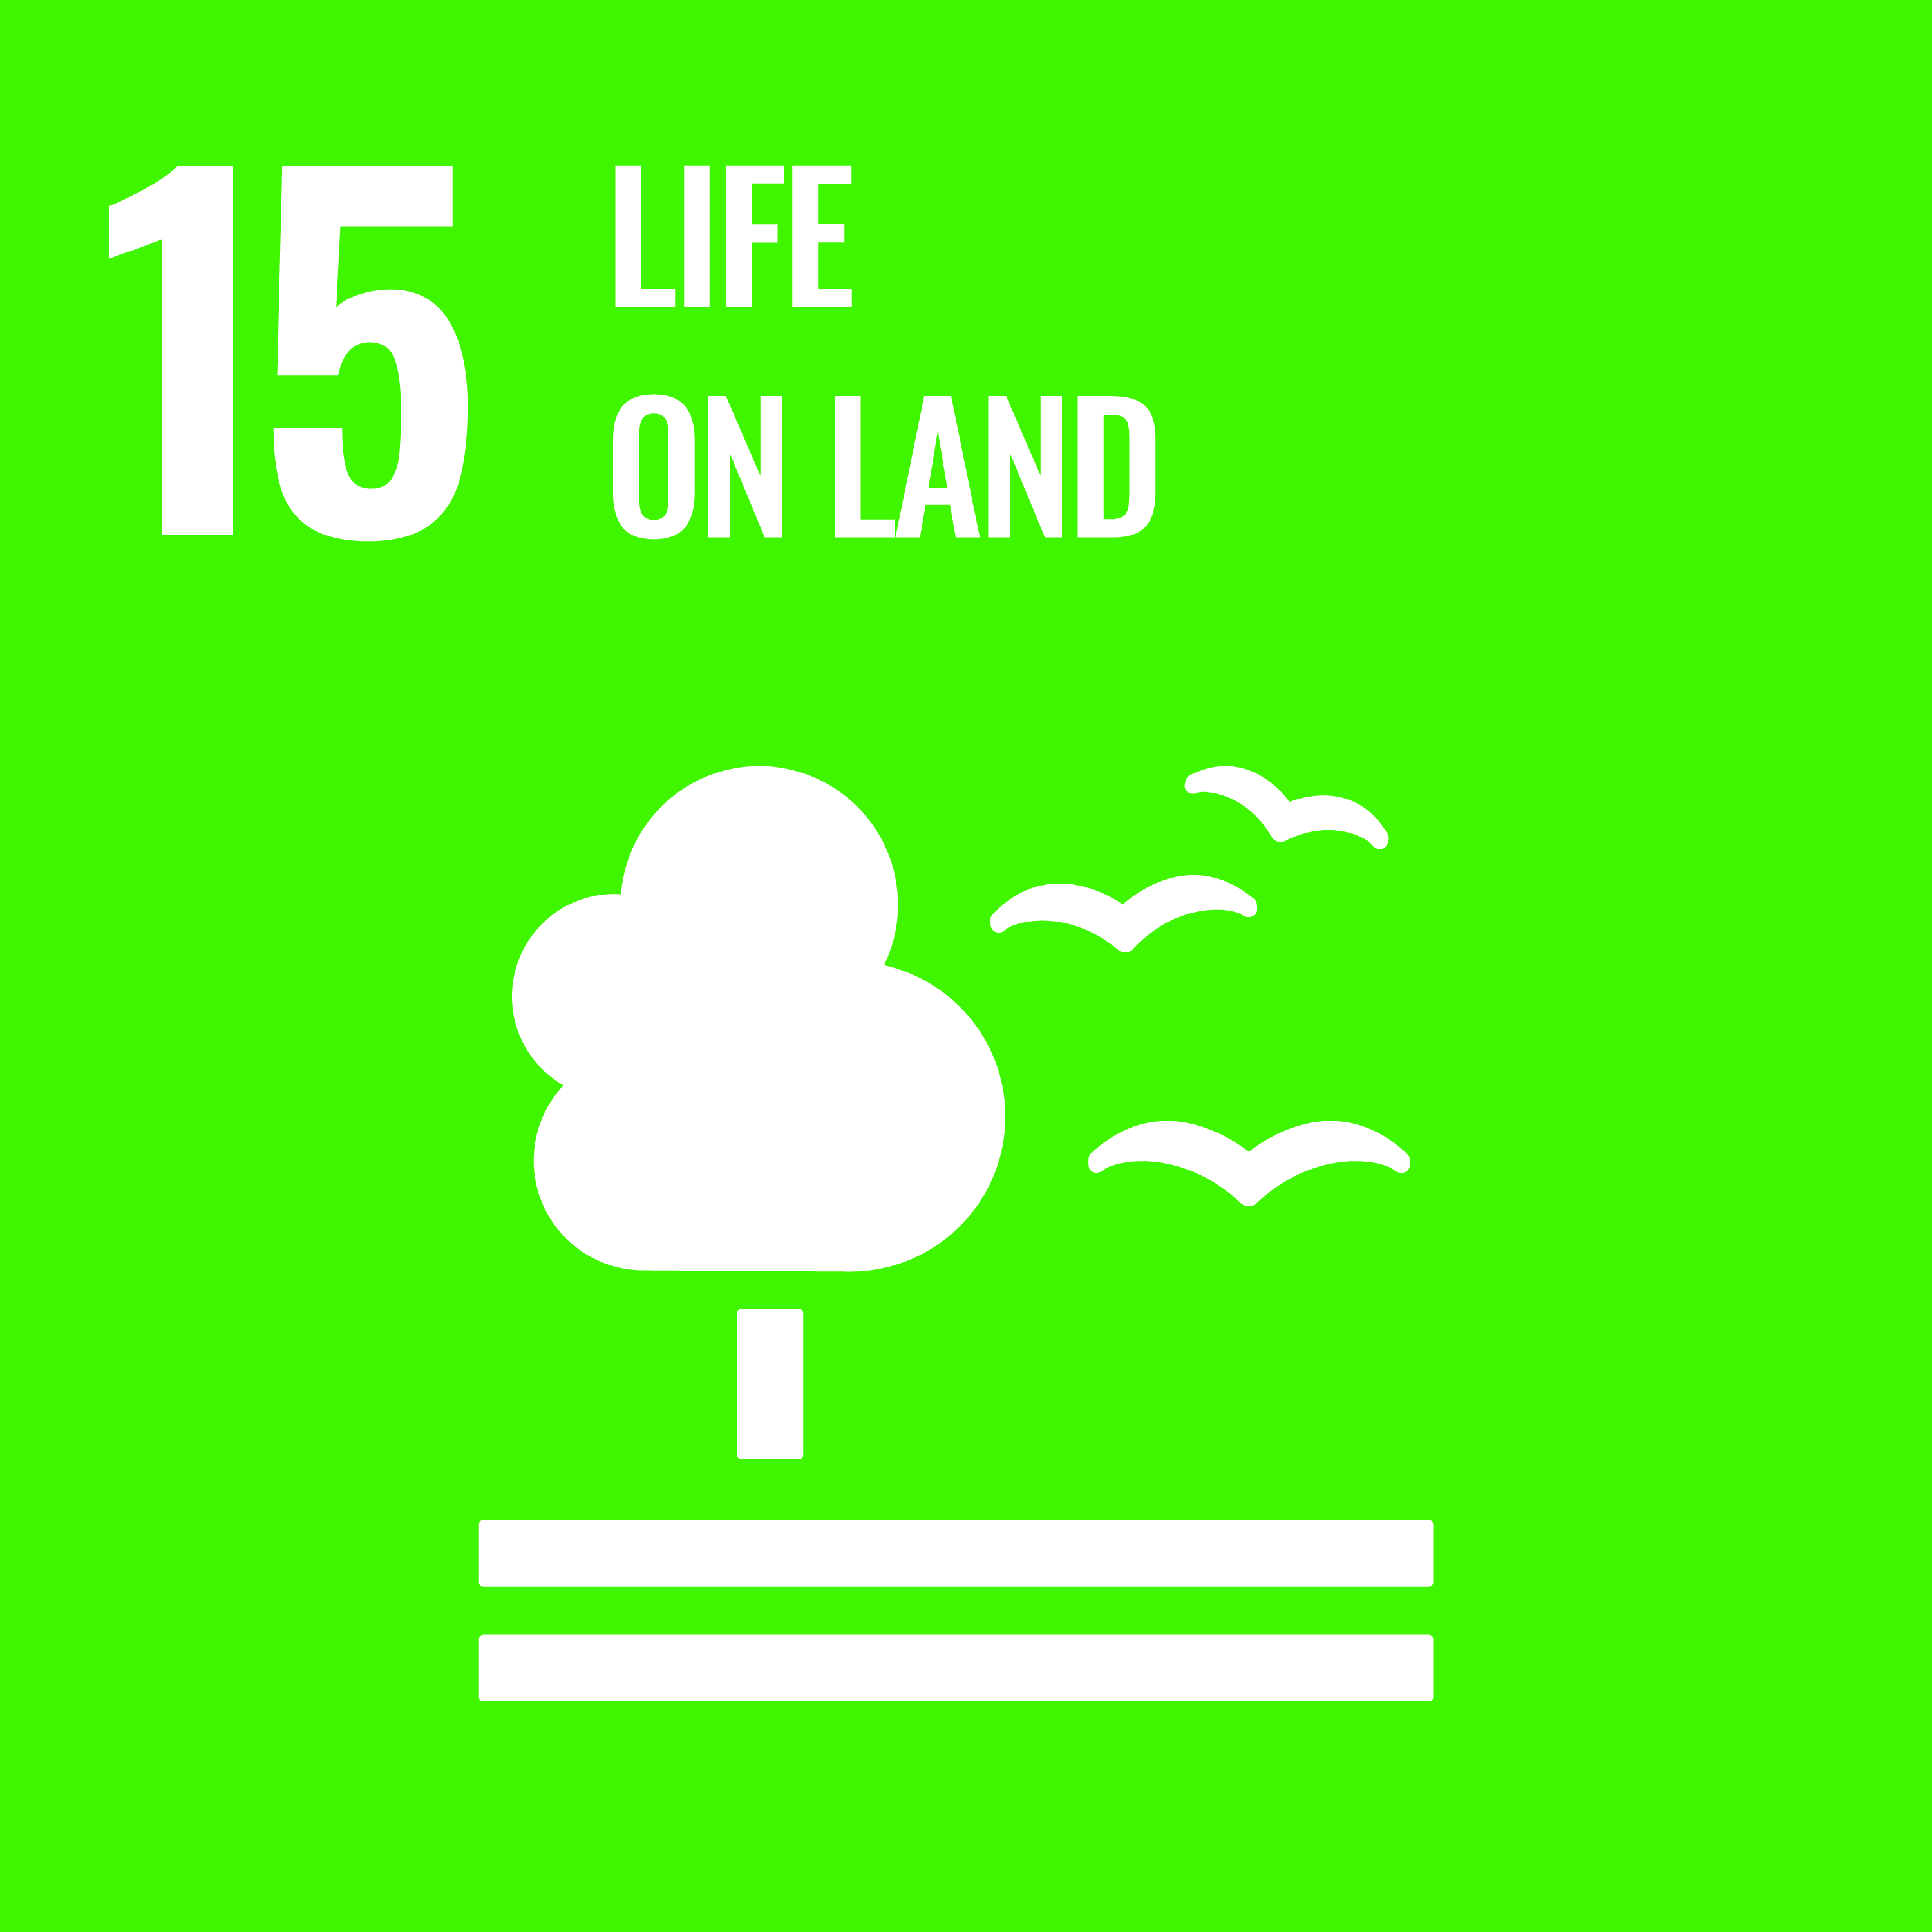 Our contribution to SDG 15